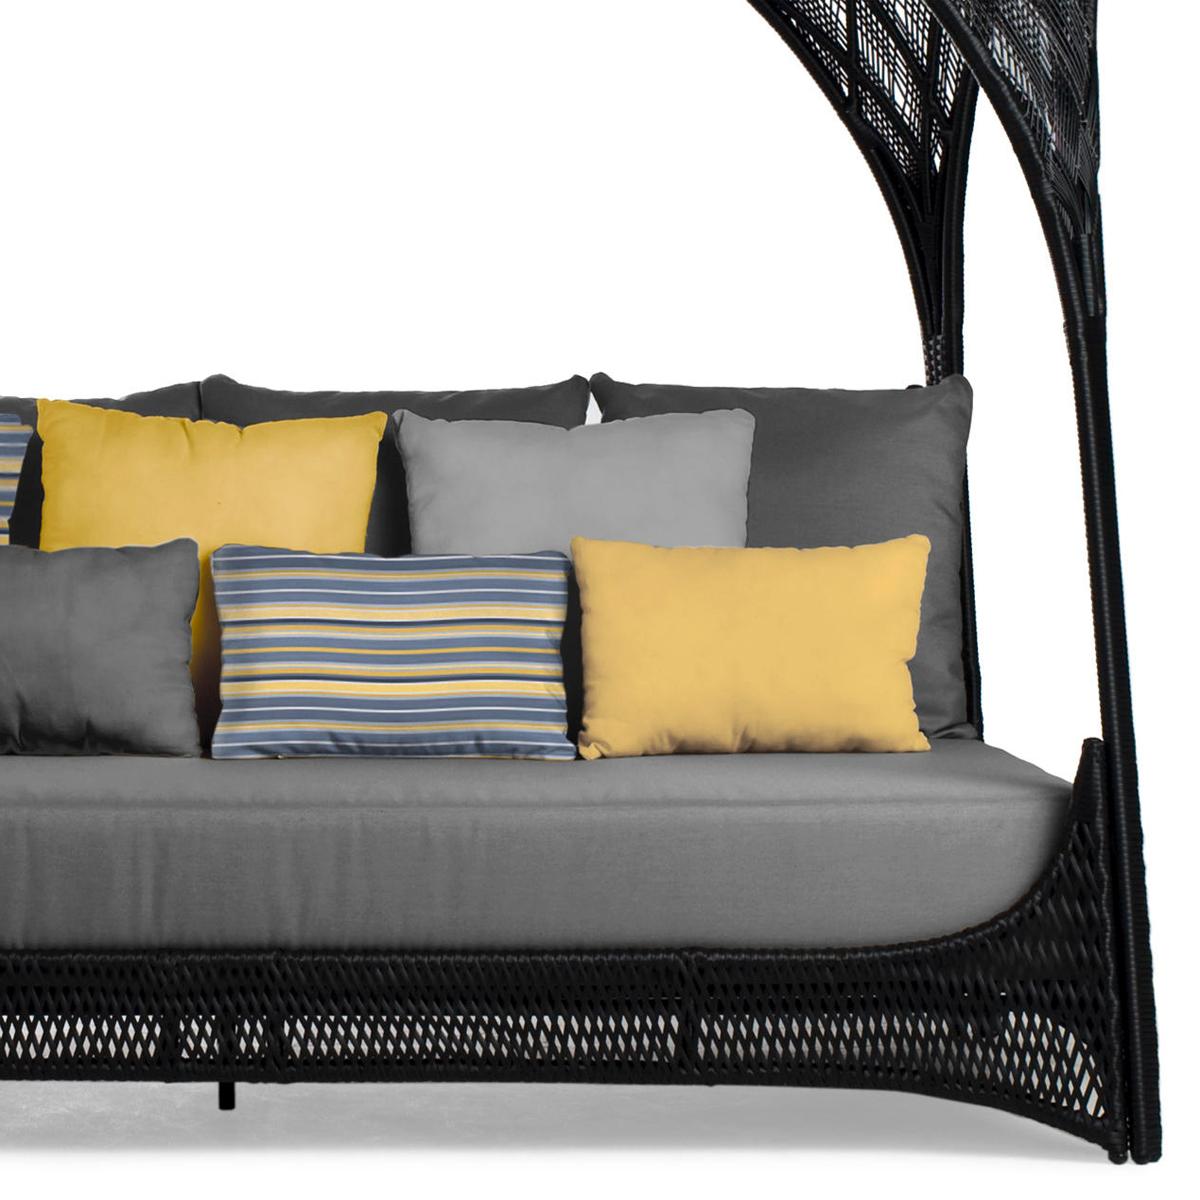 Philippine Hanging Daybed Indoor or Outdoor For Sale